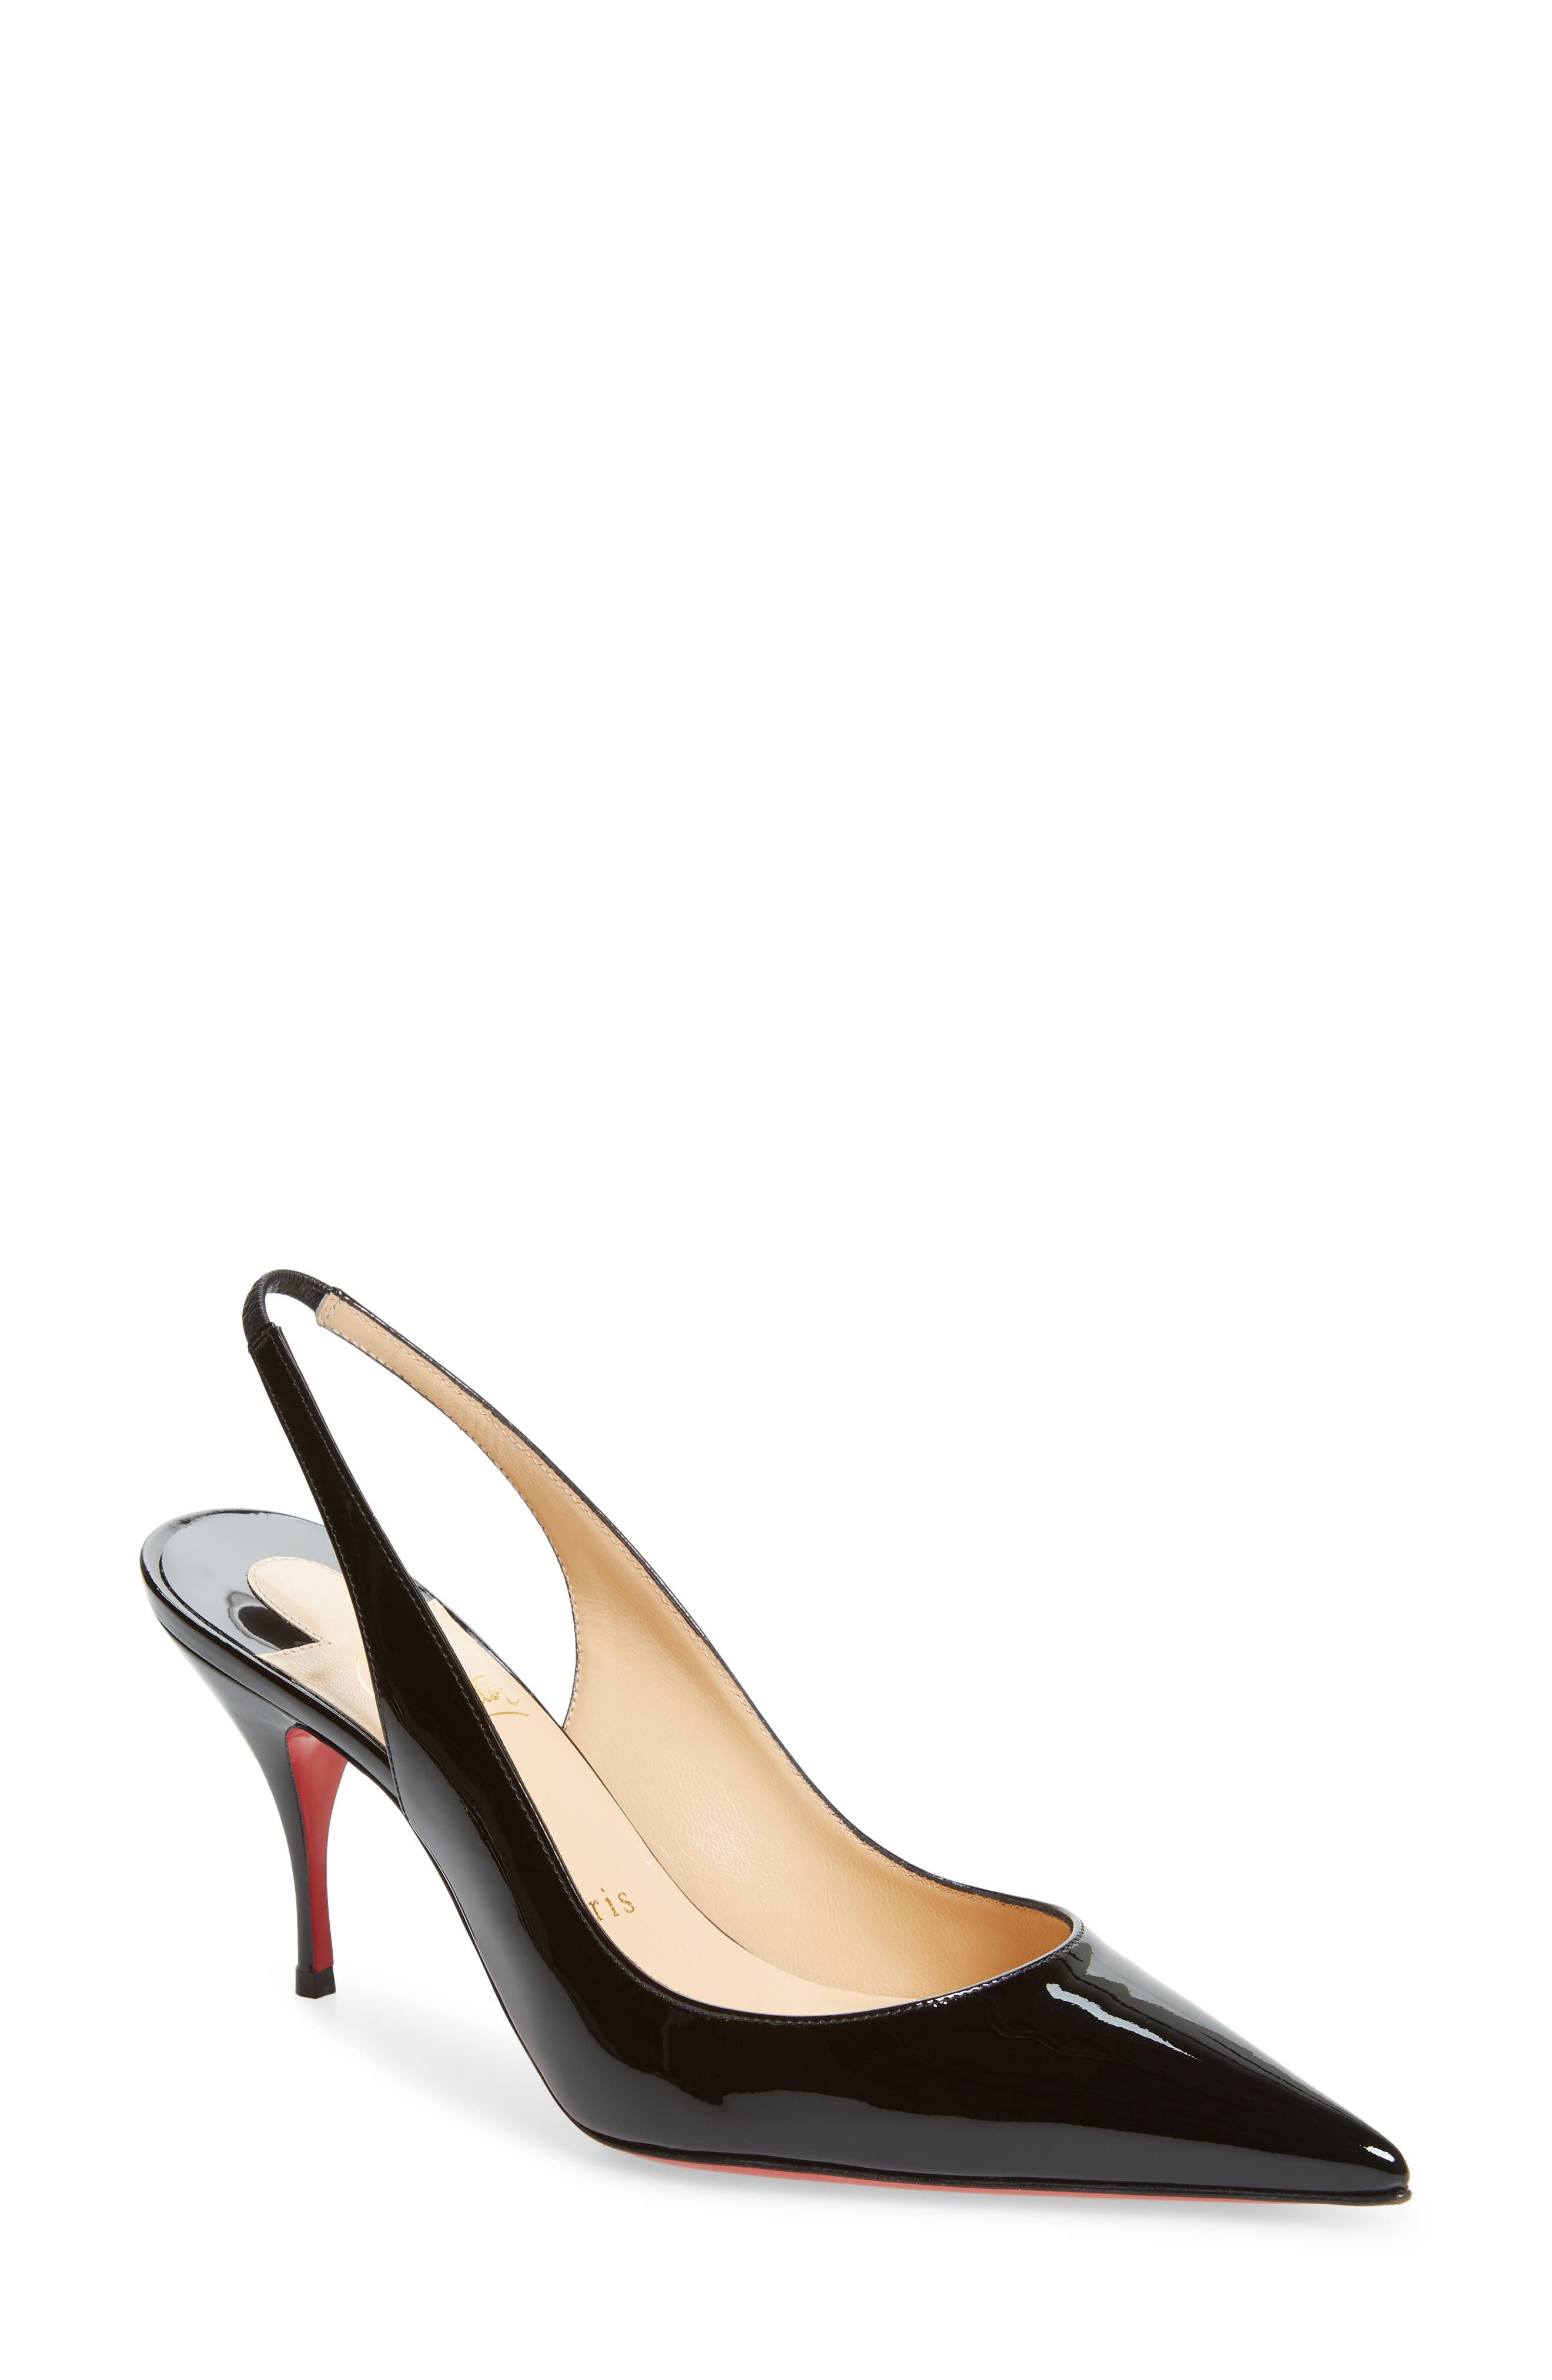 Christian Louboutin Clare Pointed Toe 